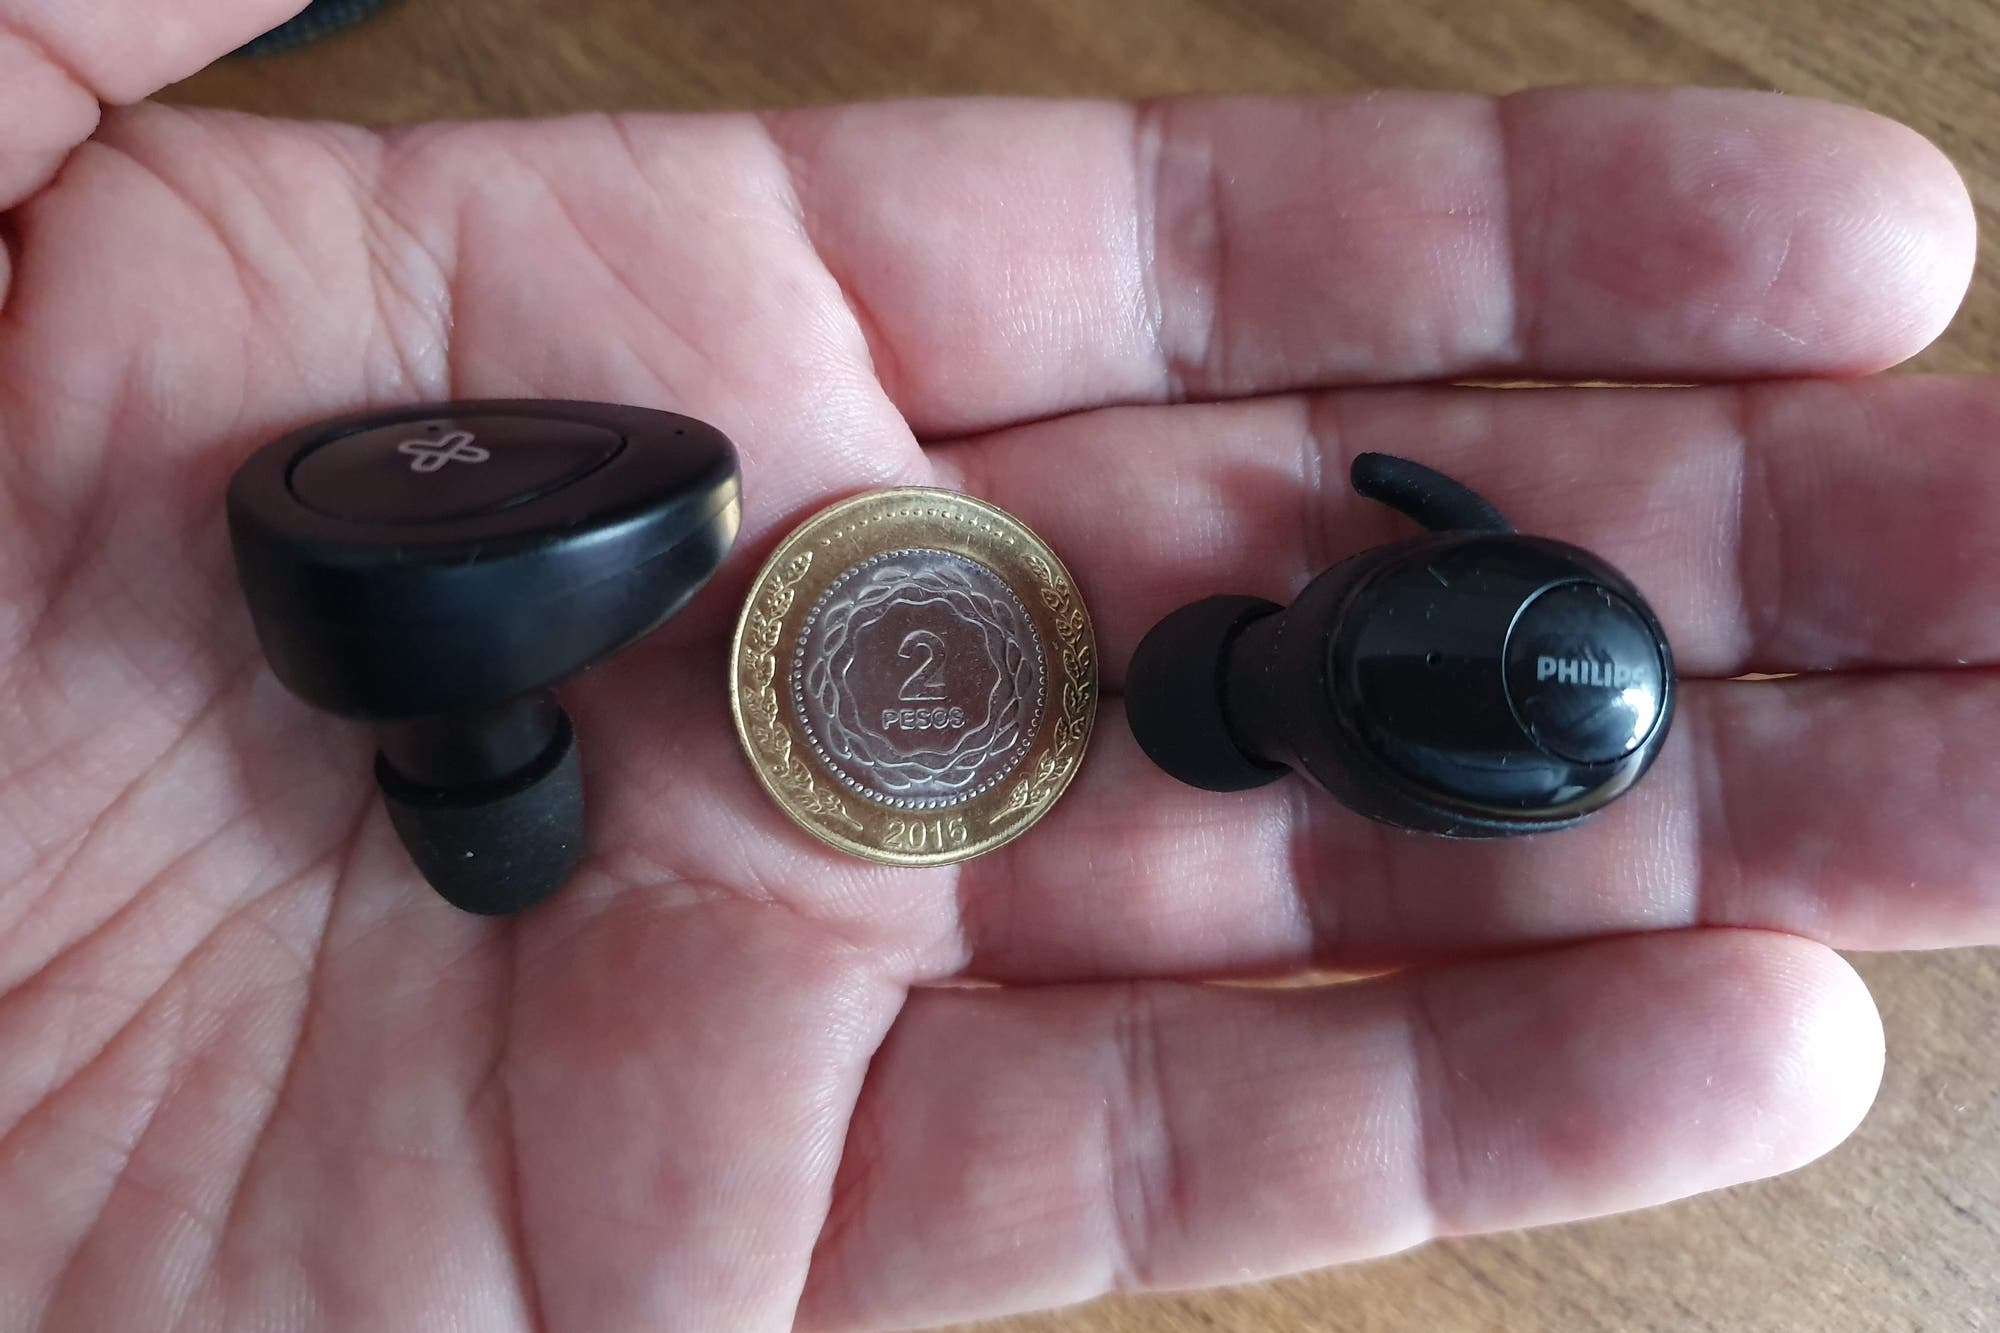 We tested the Philips UpBeat SHB2505 and Klip Extreme TwinBuds Bluetooth headphones